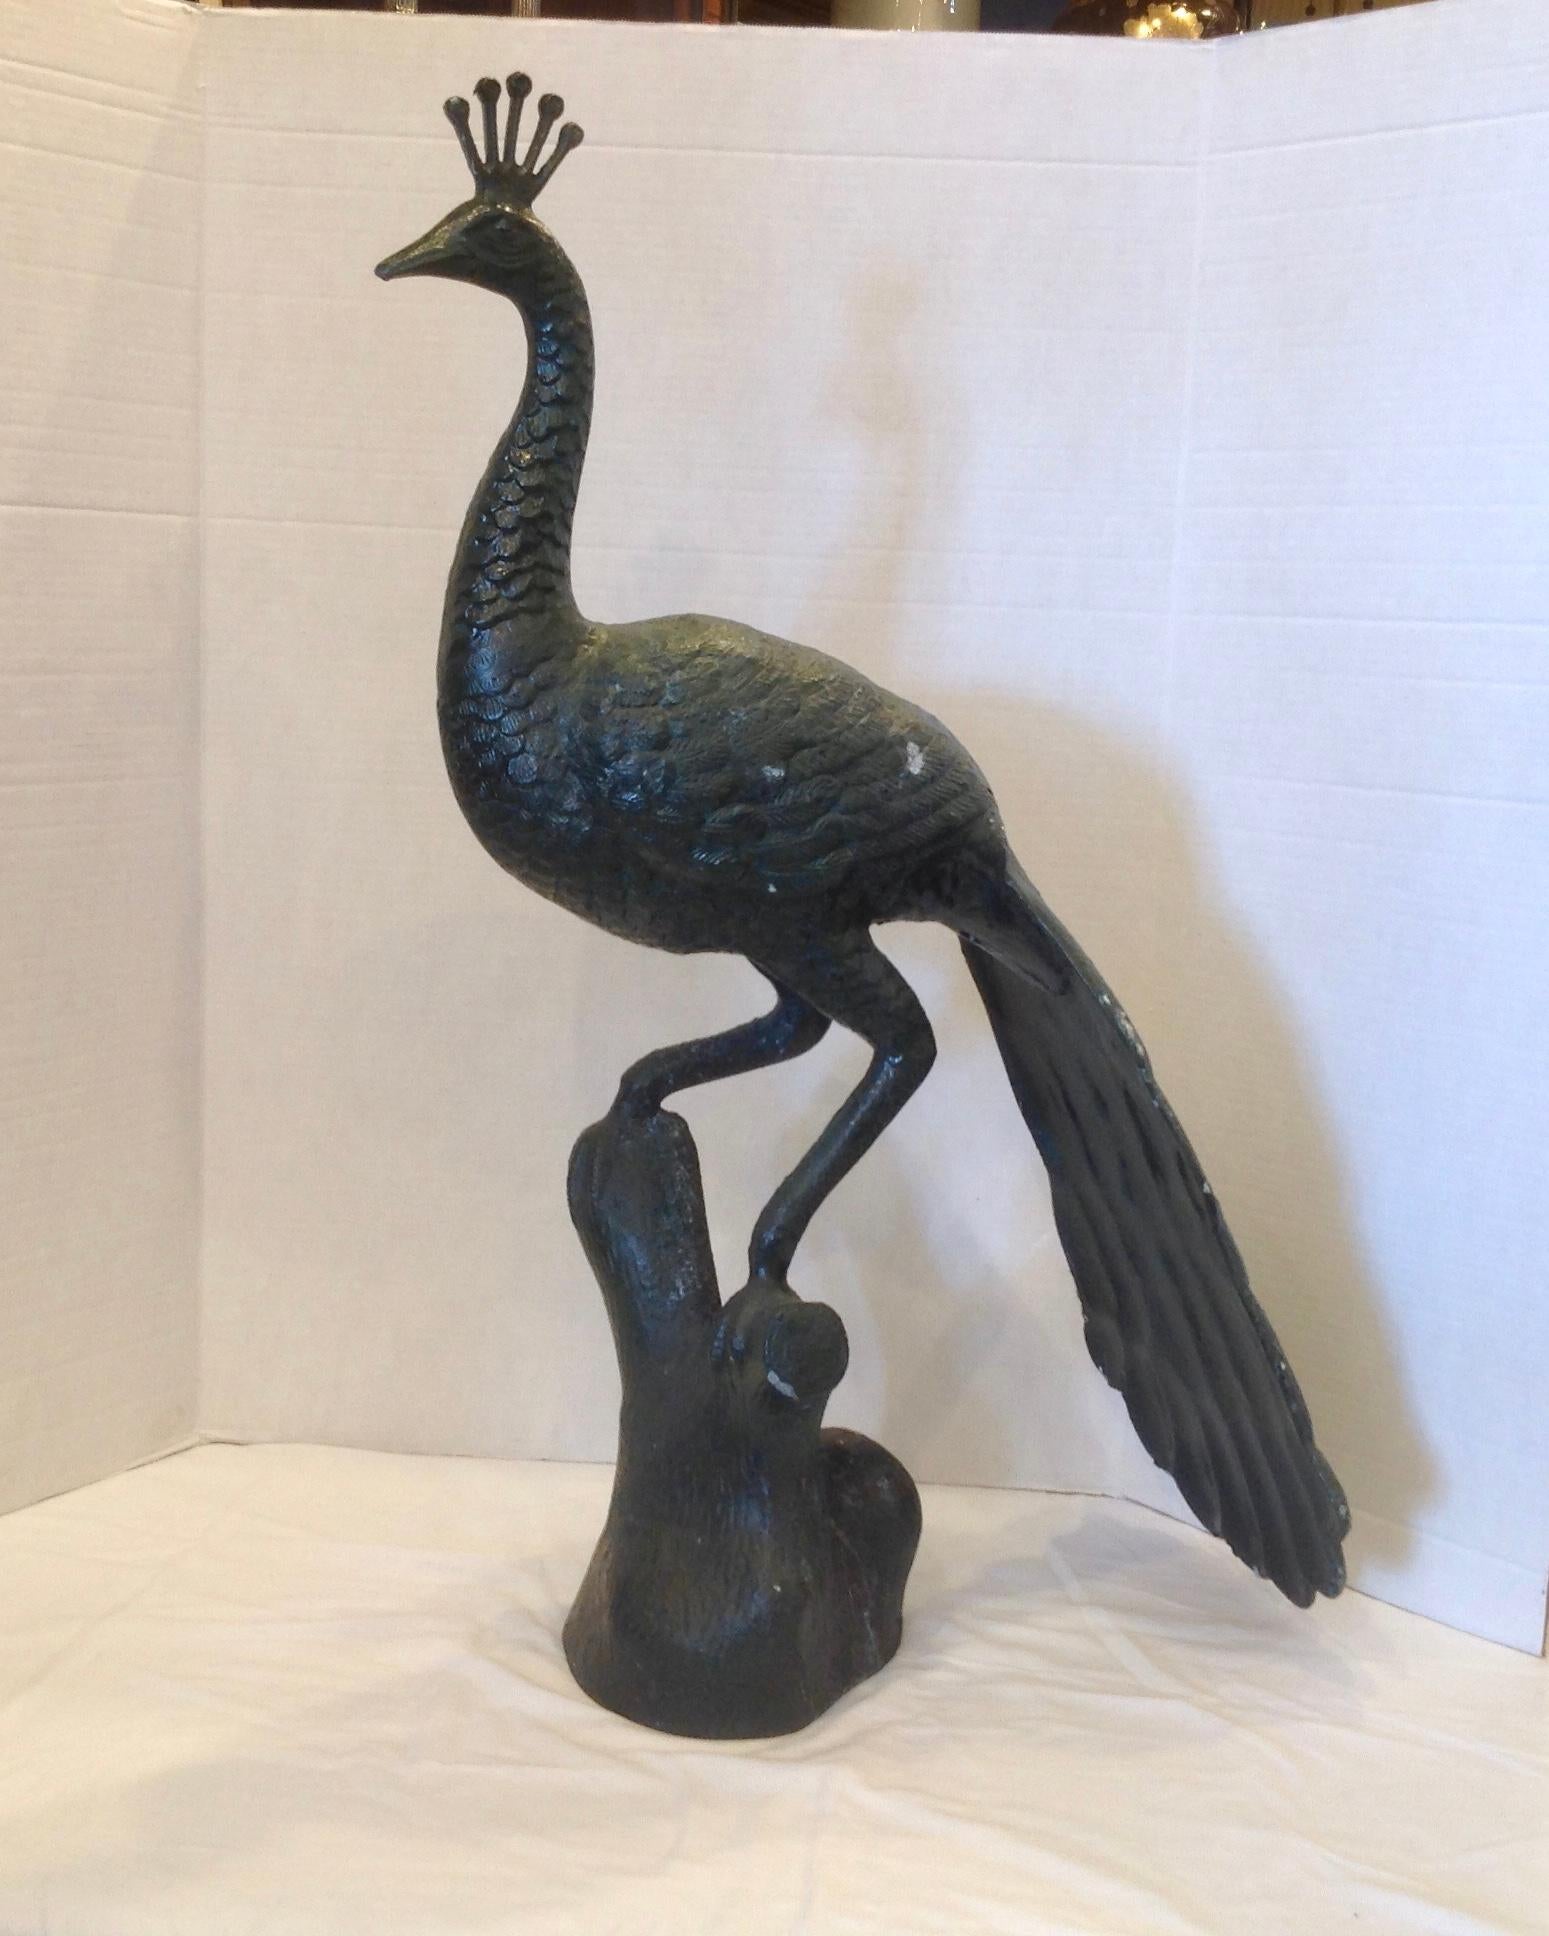 A life-size figure perched on a branch.
The piece is finished with a black color with greenish hue - unusual.